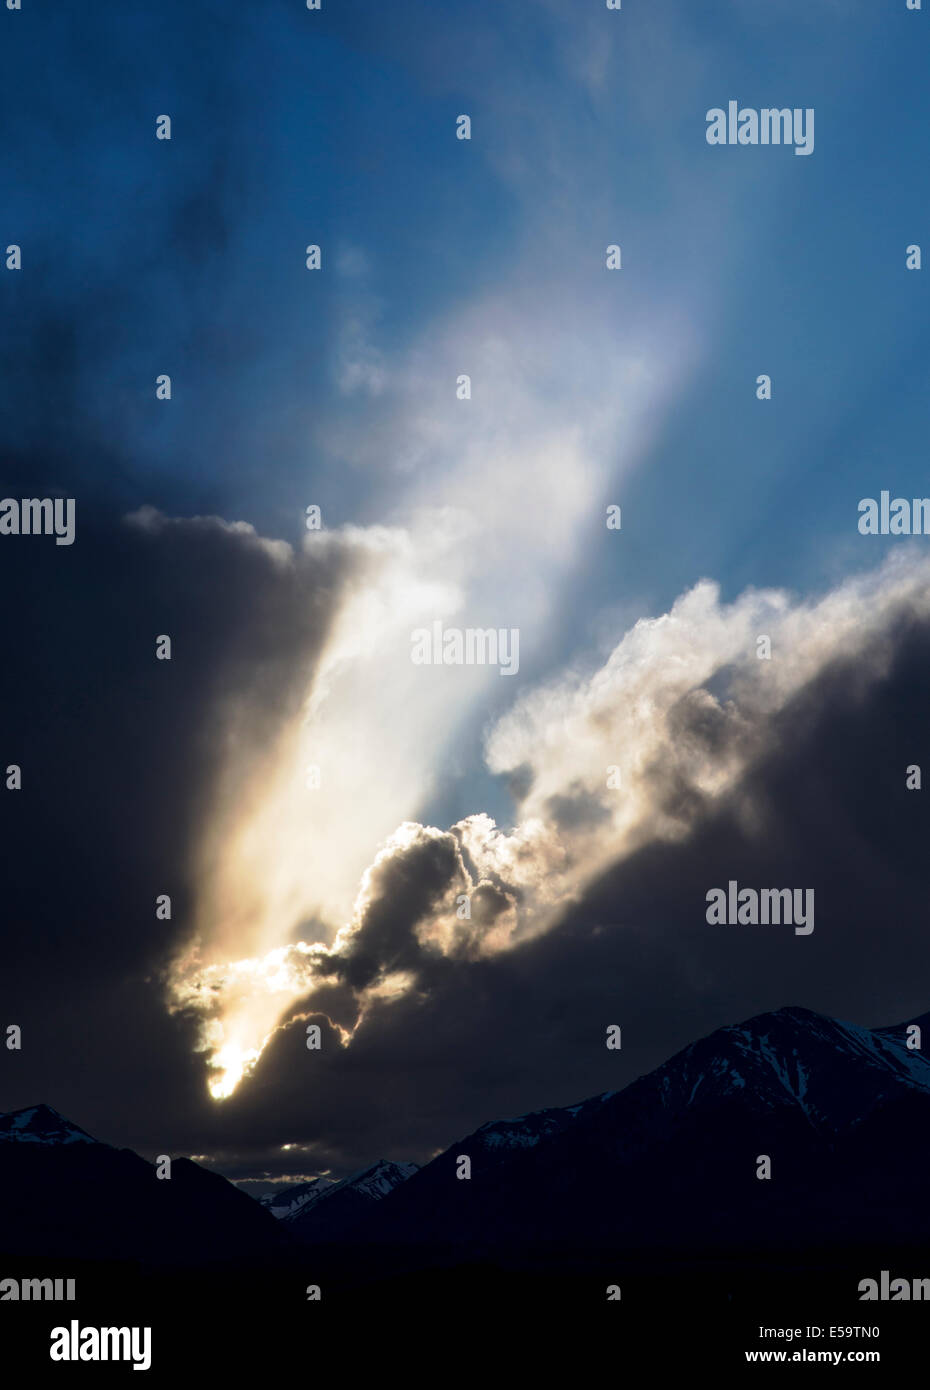 Dramatic sunlight and clouds over Central Colorado Rocky Mountains, USA Stock Photo